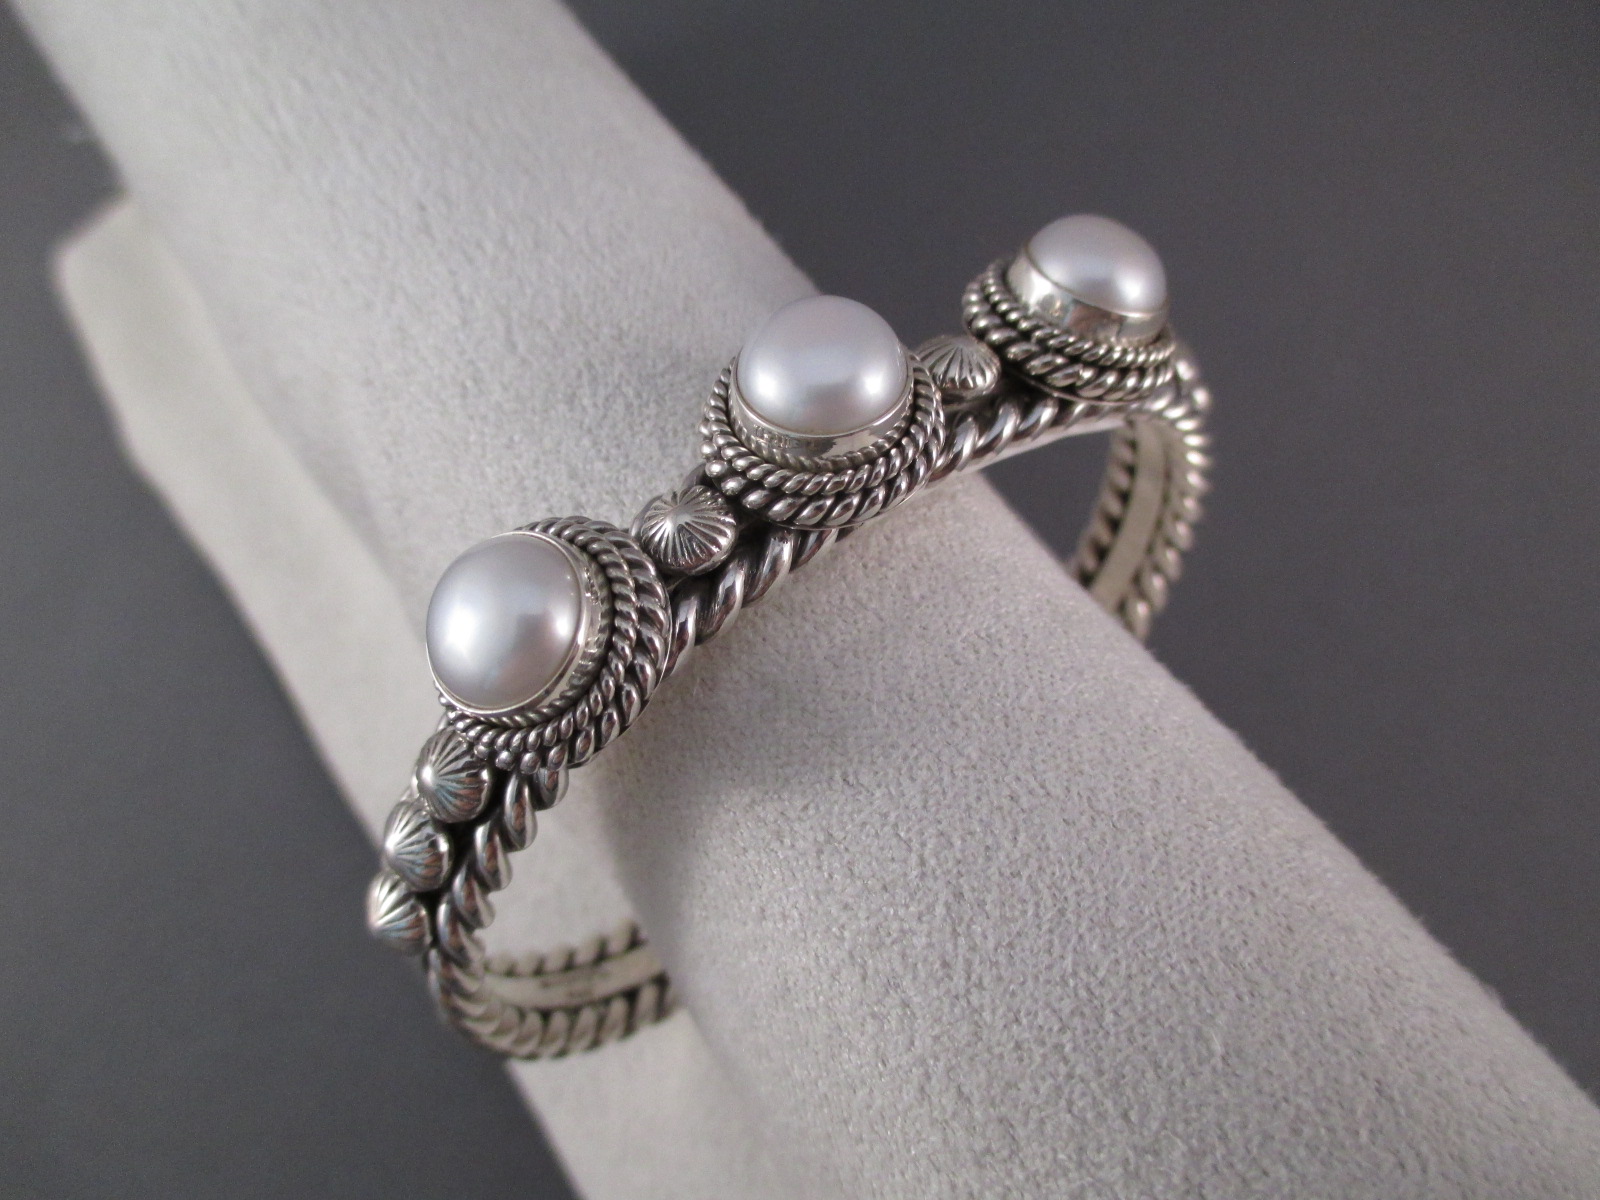 Sterling Silver Cuff Bracelet with Pearls by Native American (Navajo) Jewelry Artist, Artie Yellowhorse $350-